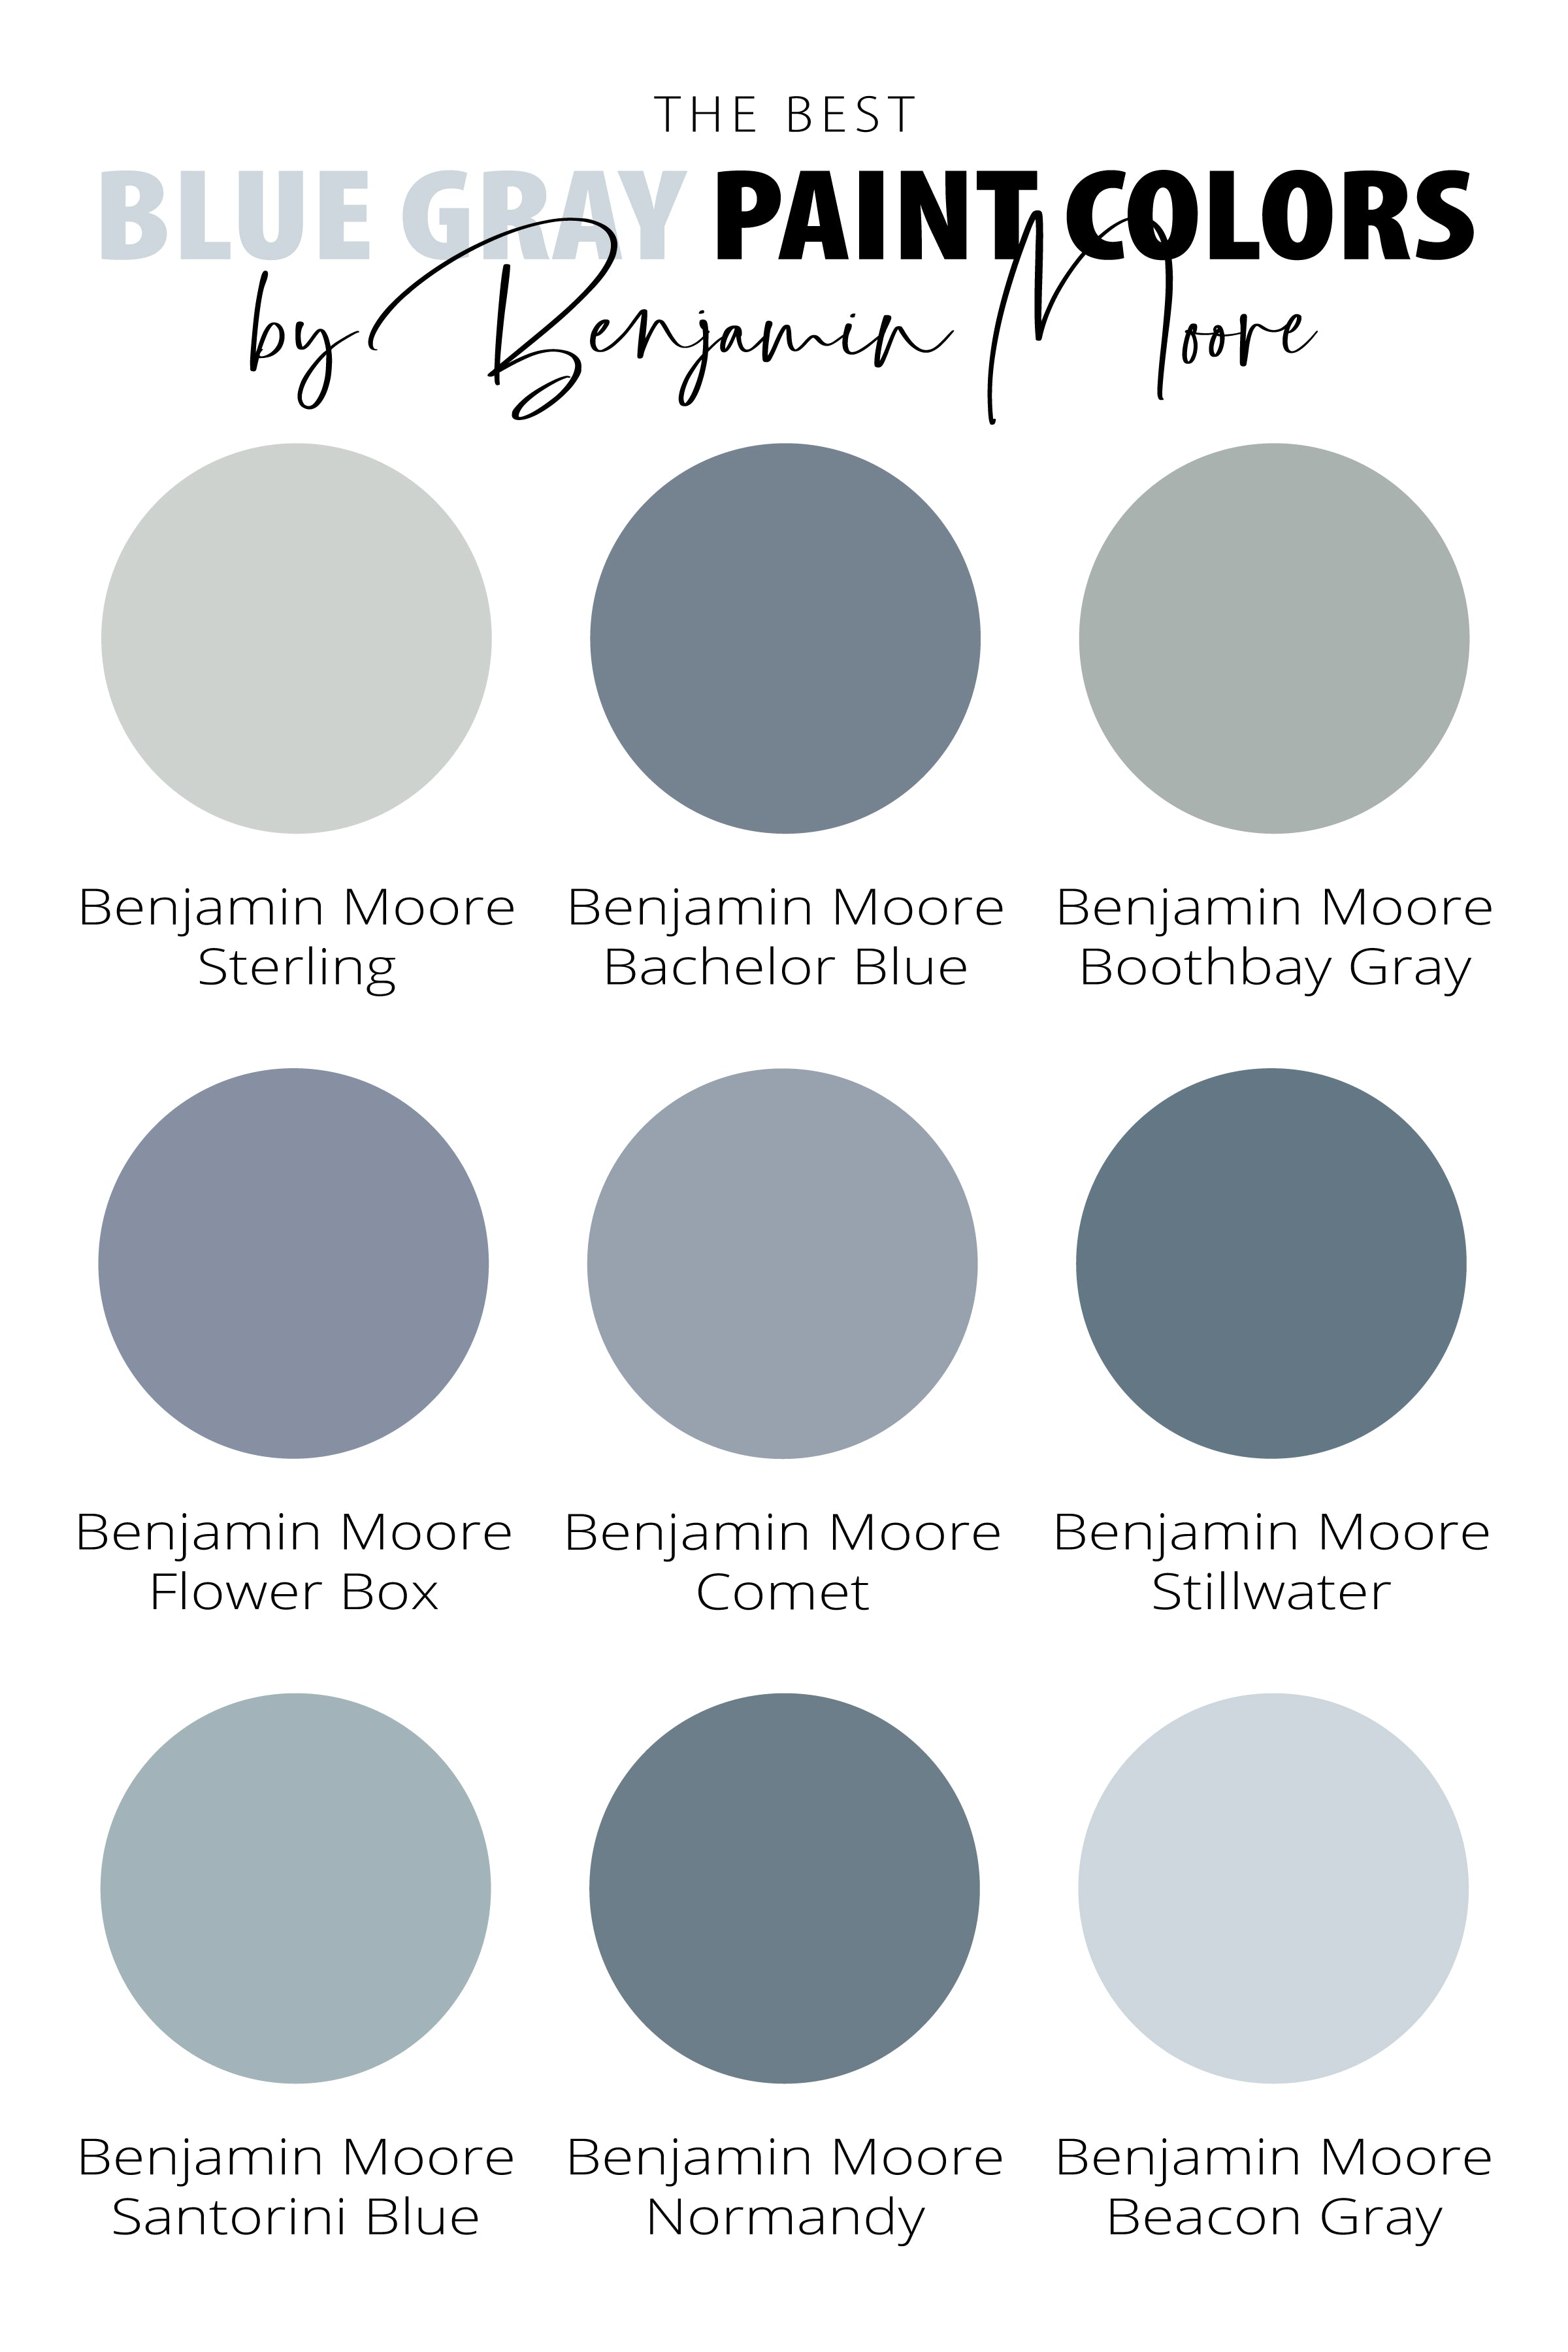 Best-Blue-Gray-Paint-Colors-with-Names-by-Benjamin-Moore